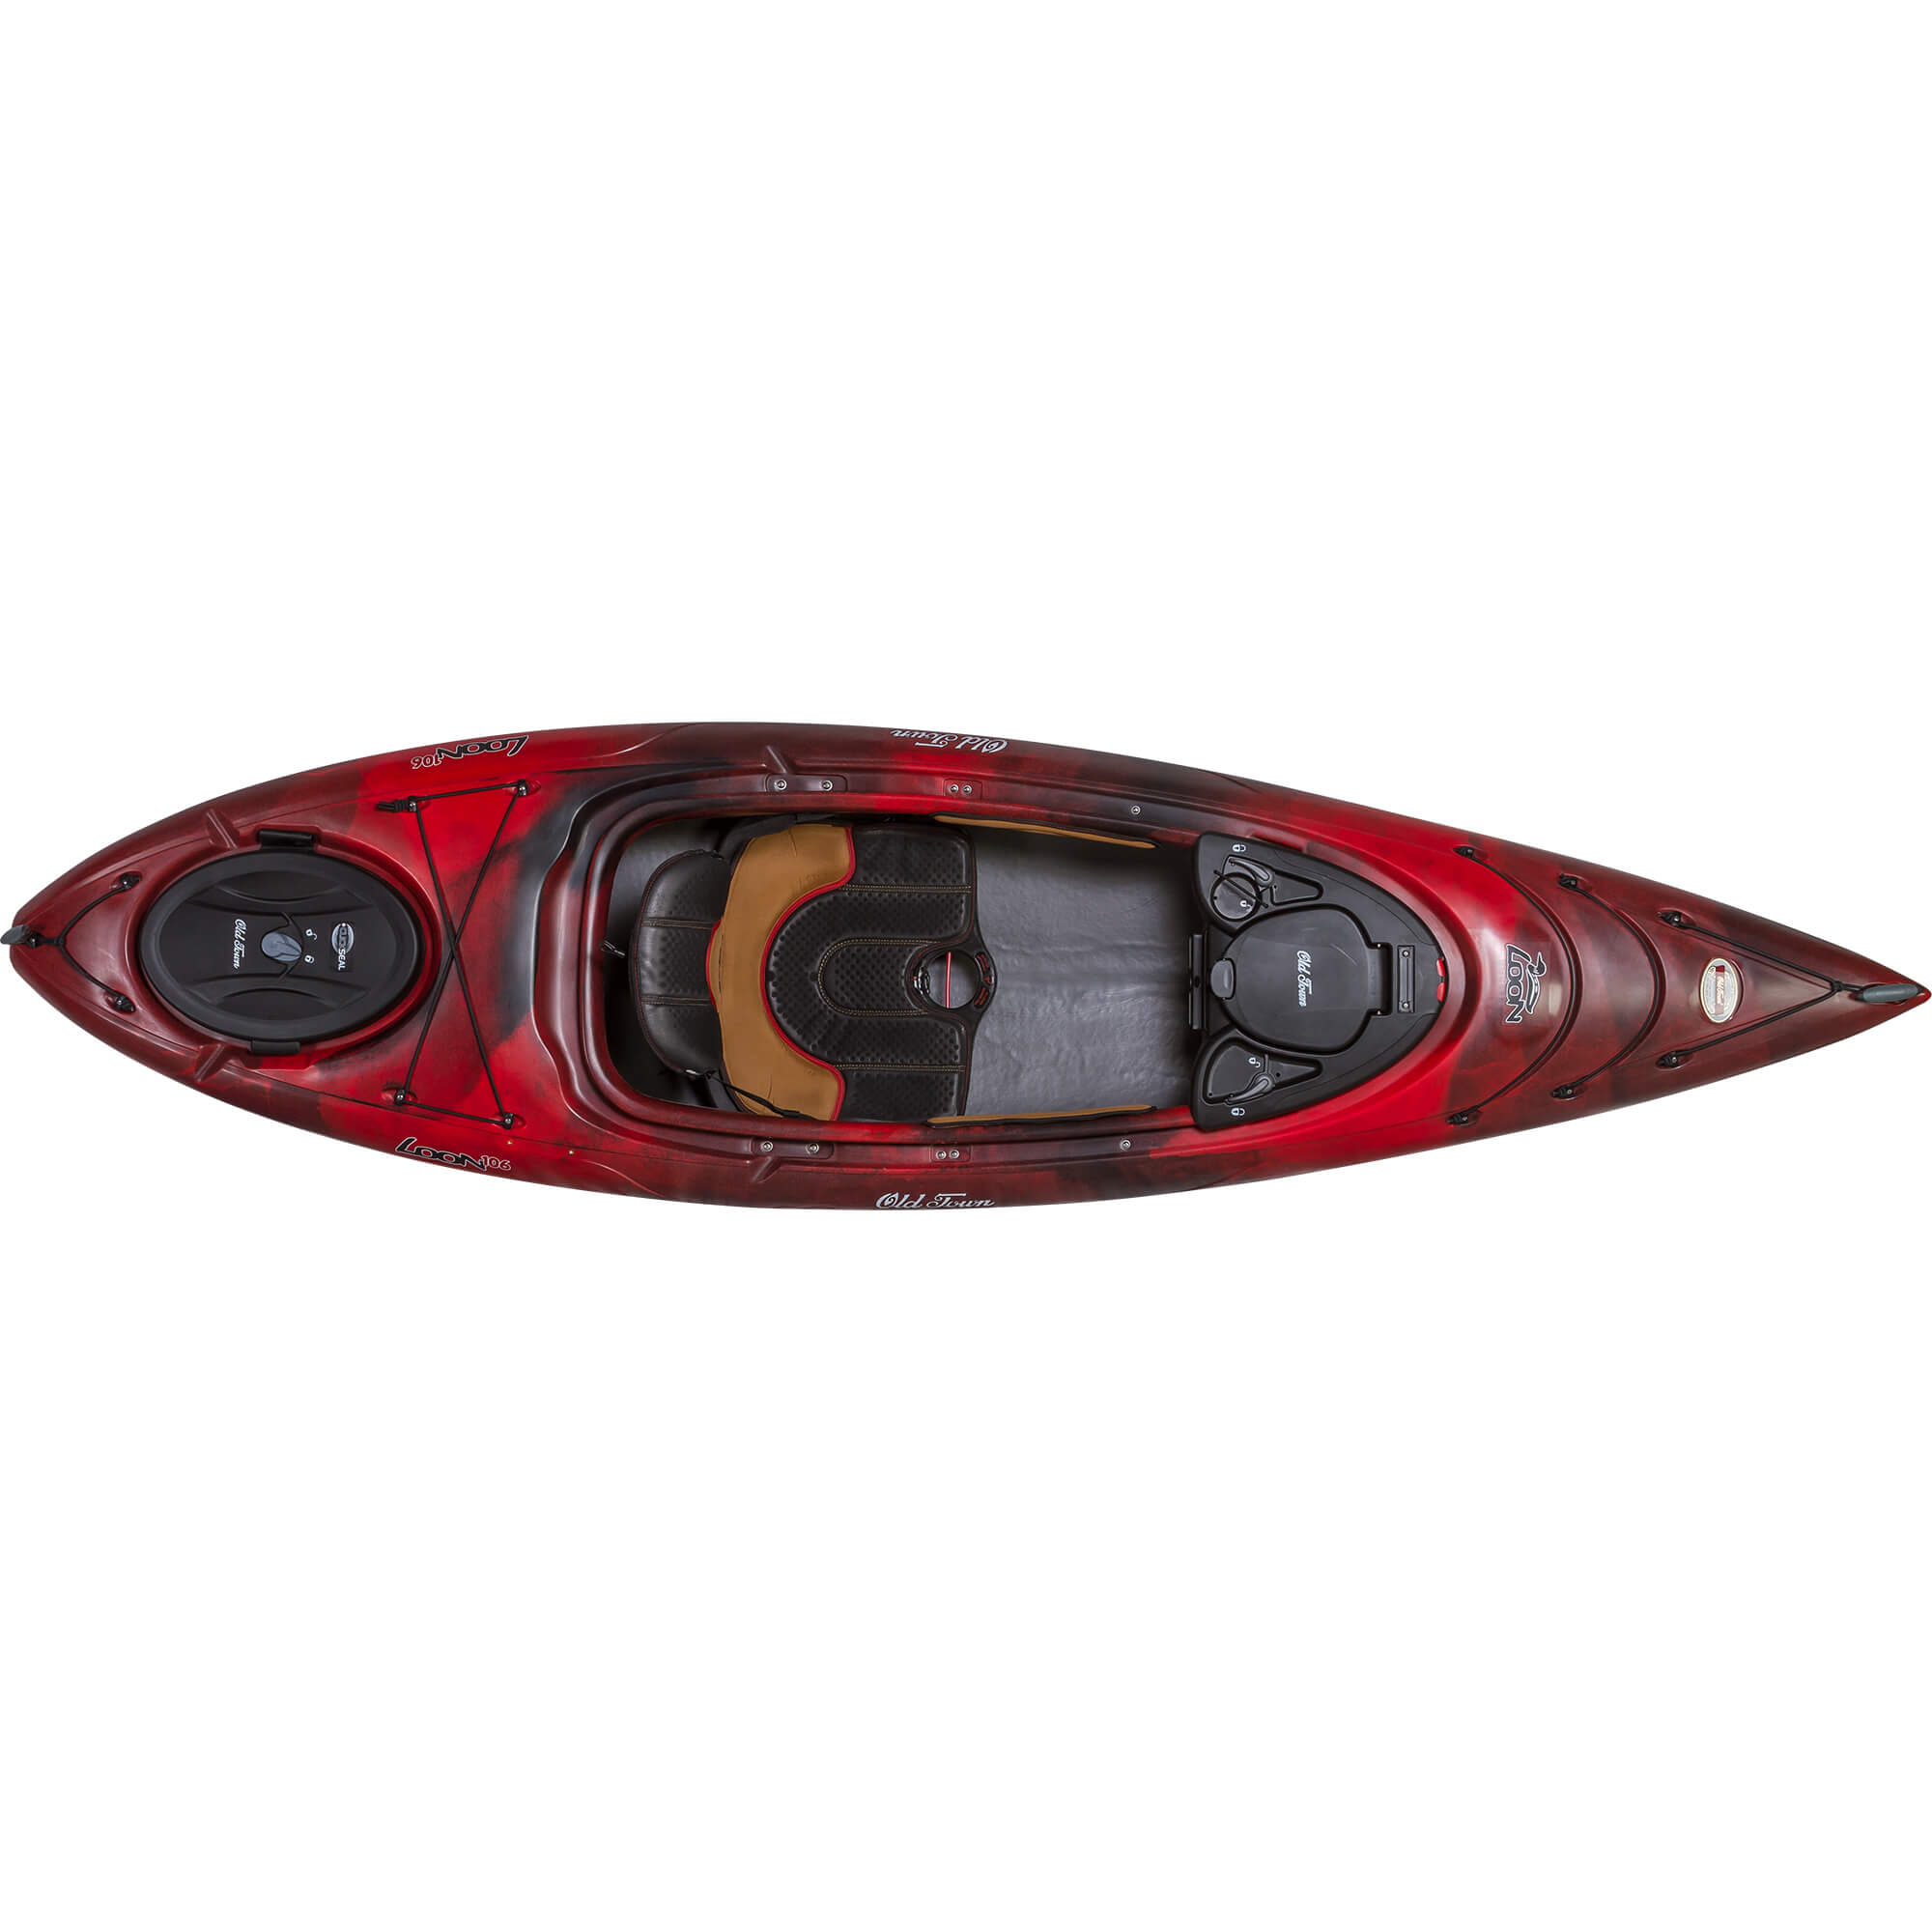 Old Town Loon 106 Recreational Kayak - Gear For Adventure